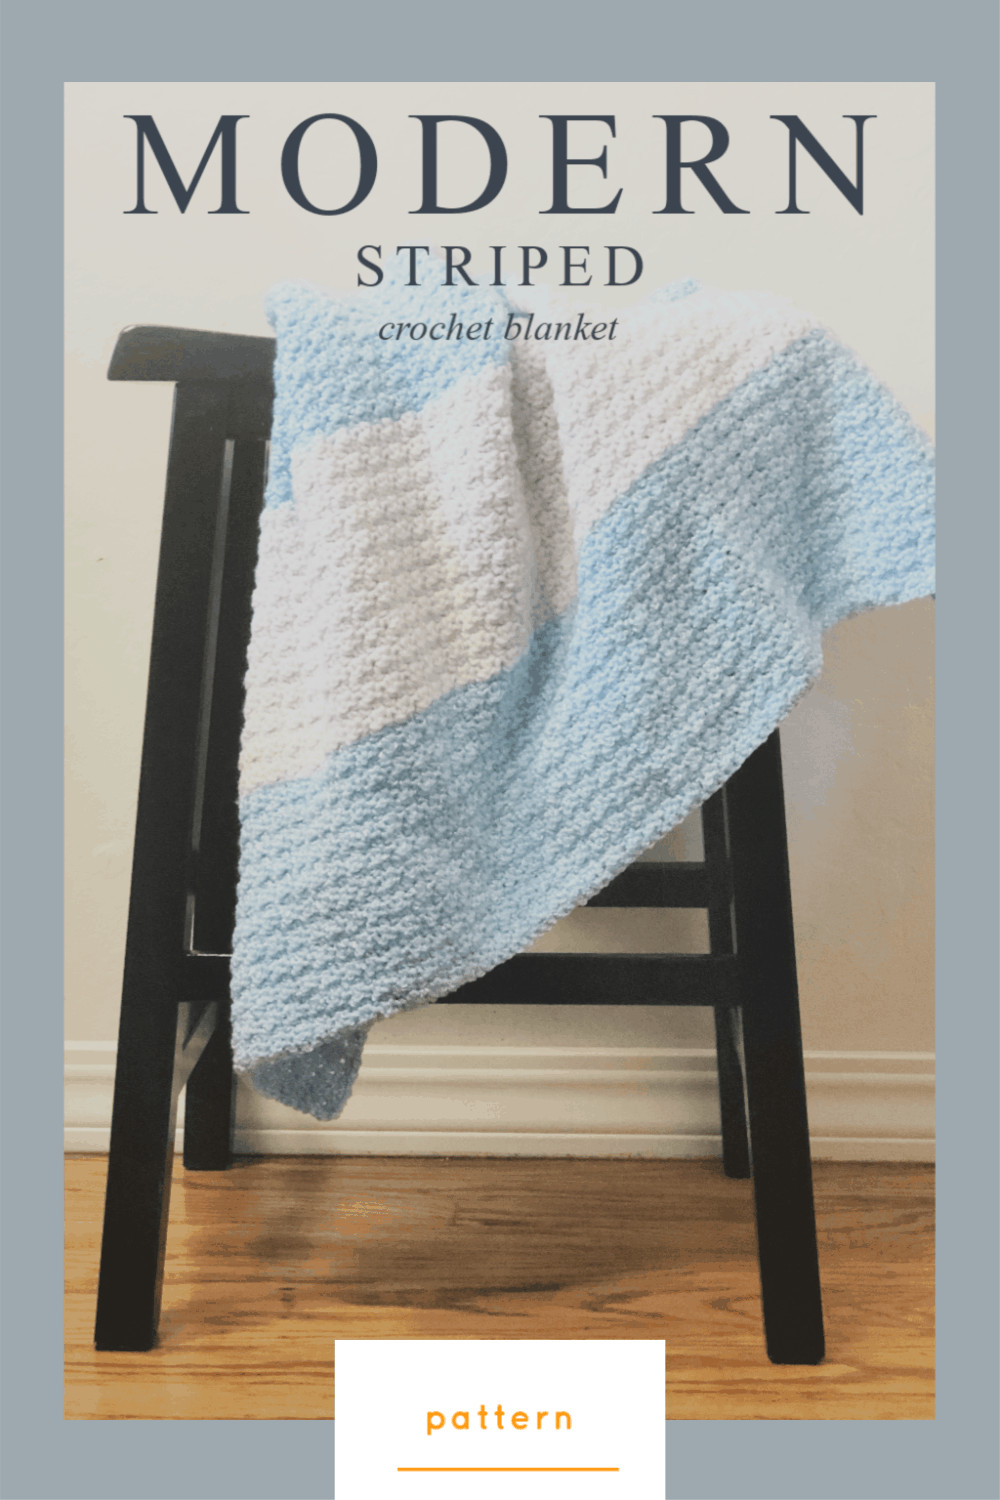 picture of blue and white crochet striped blanket on black stool